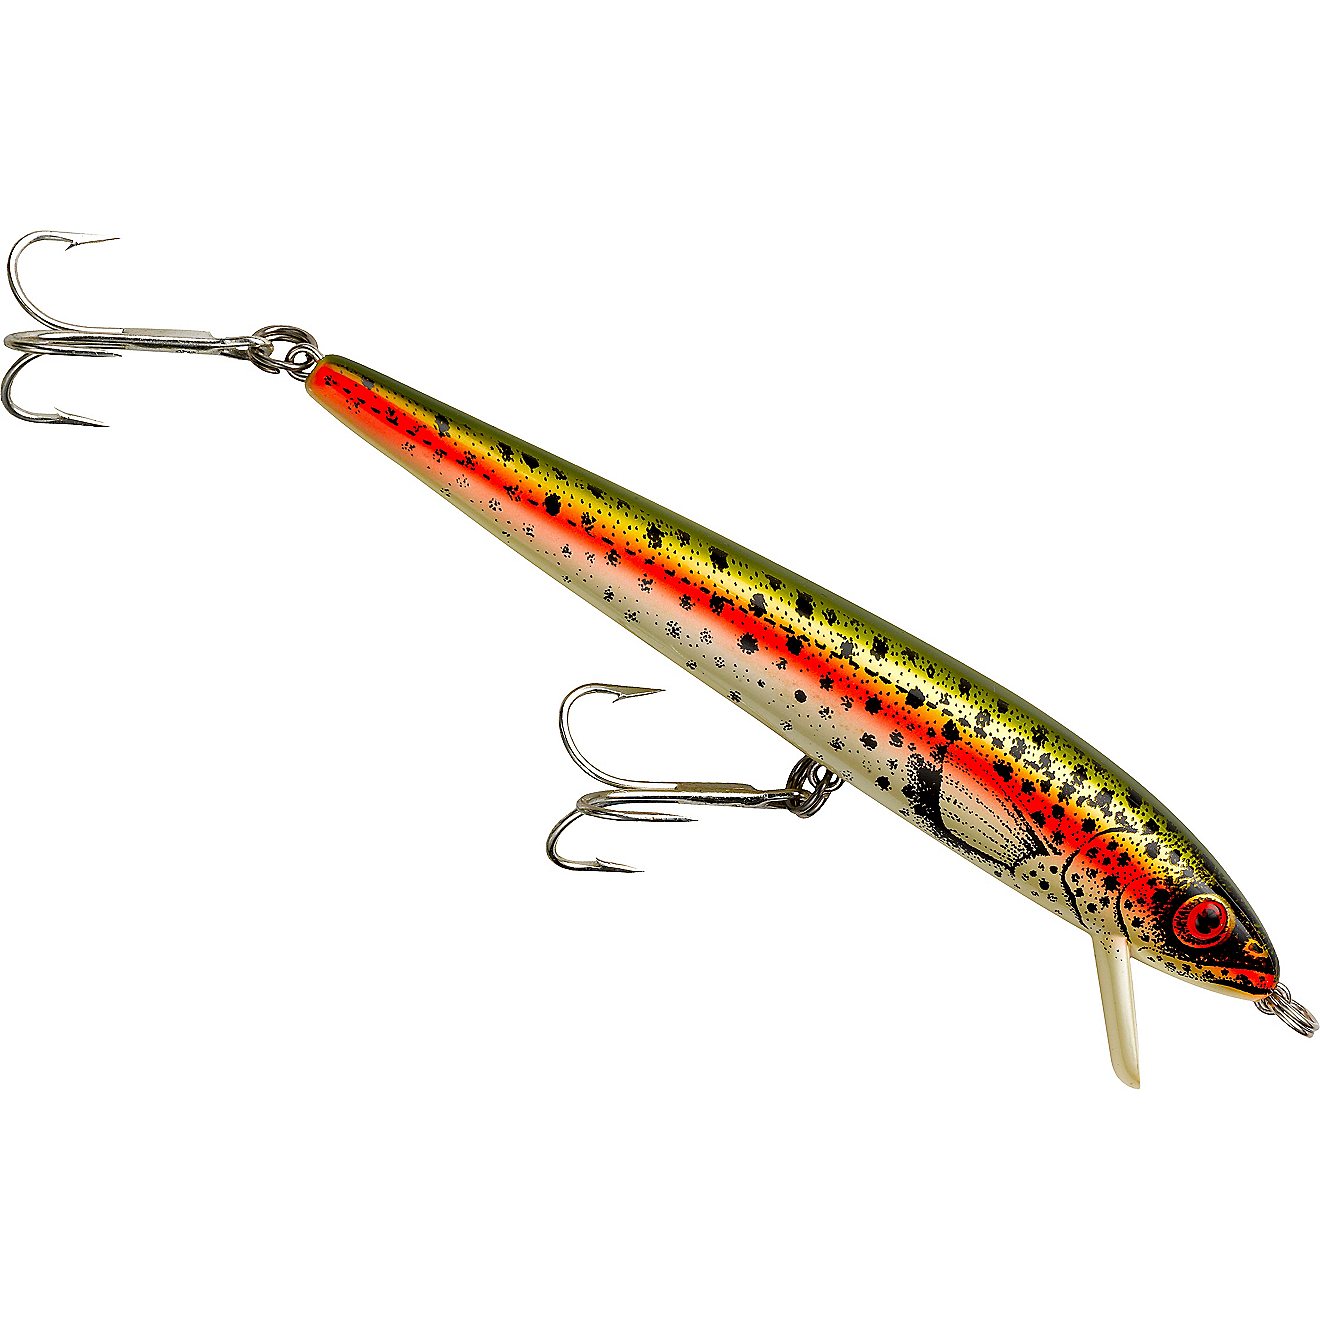 Cotton Cordell 1 oz. - 7" Red Fin Lure                                                                                           - view number 1